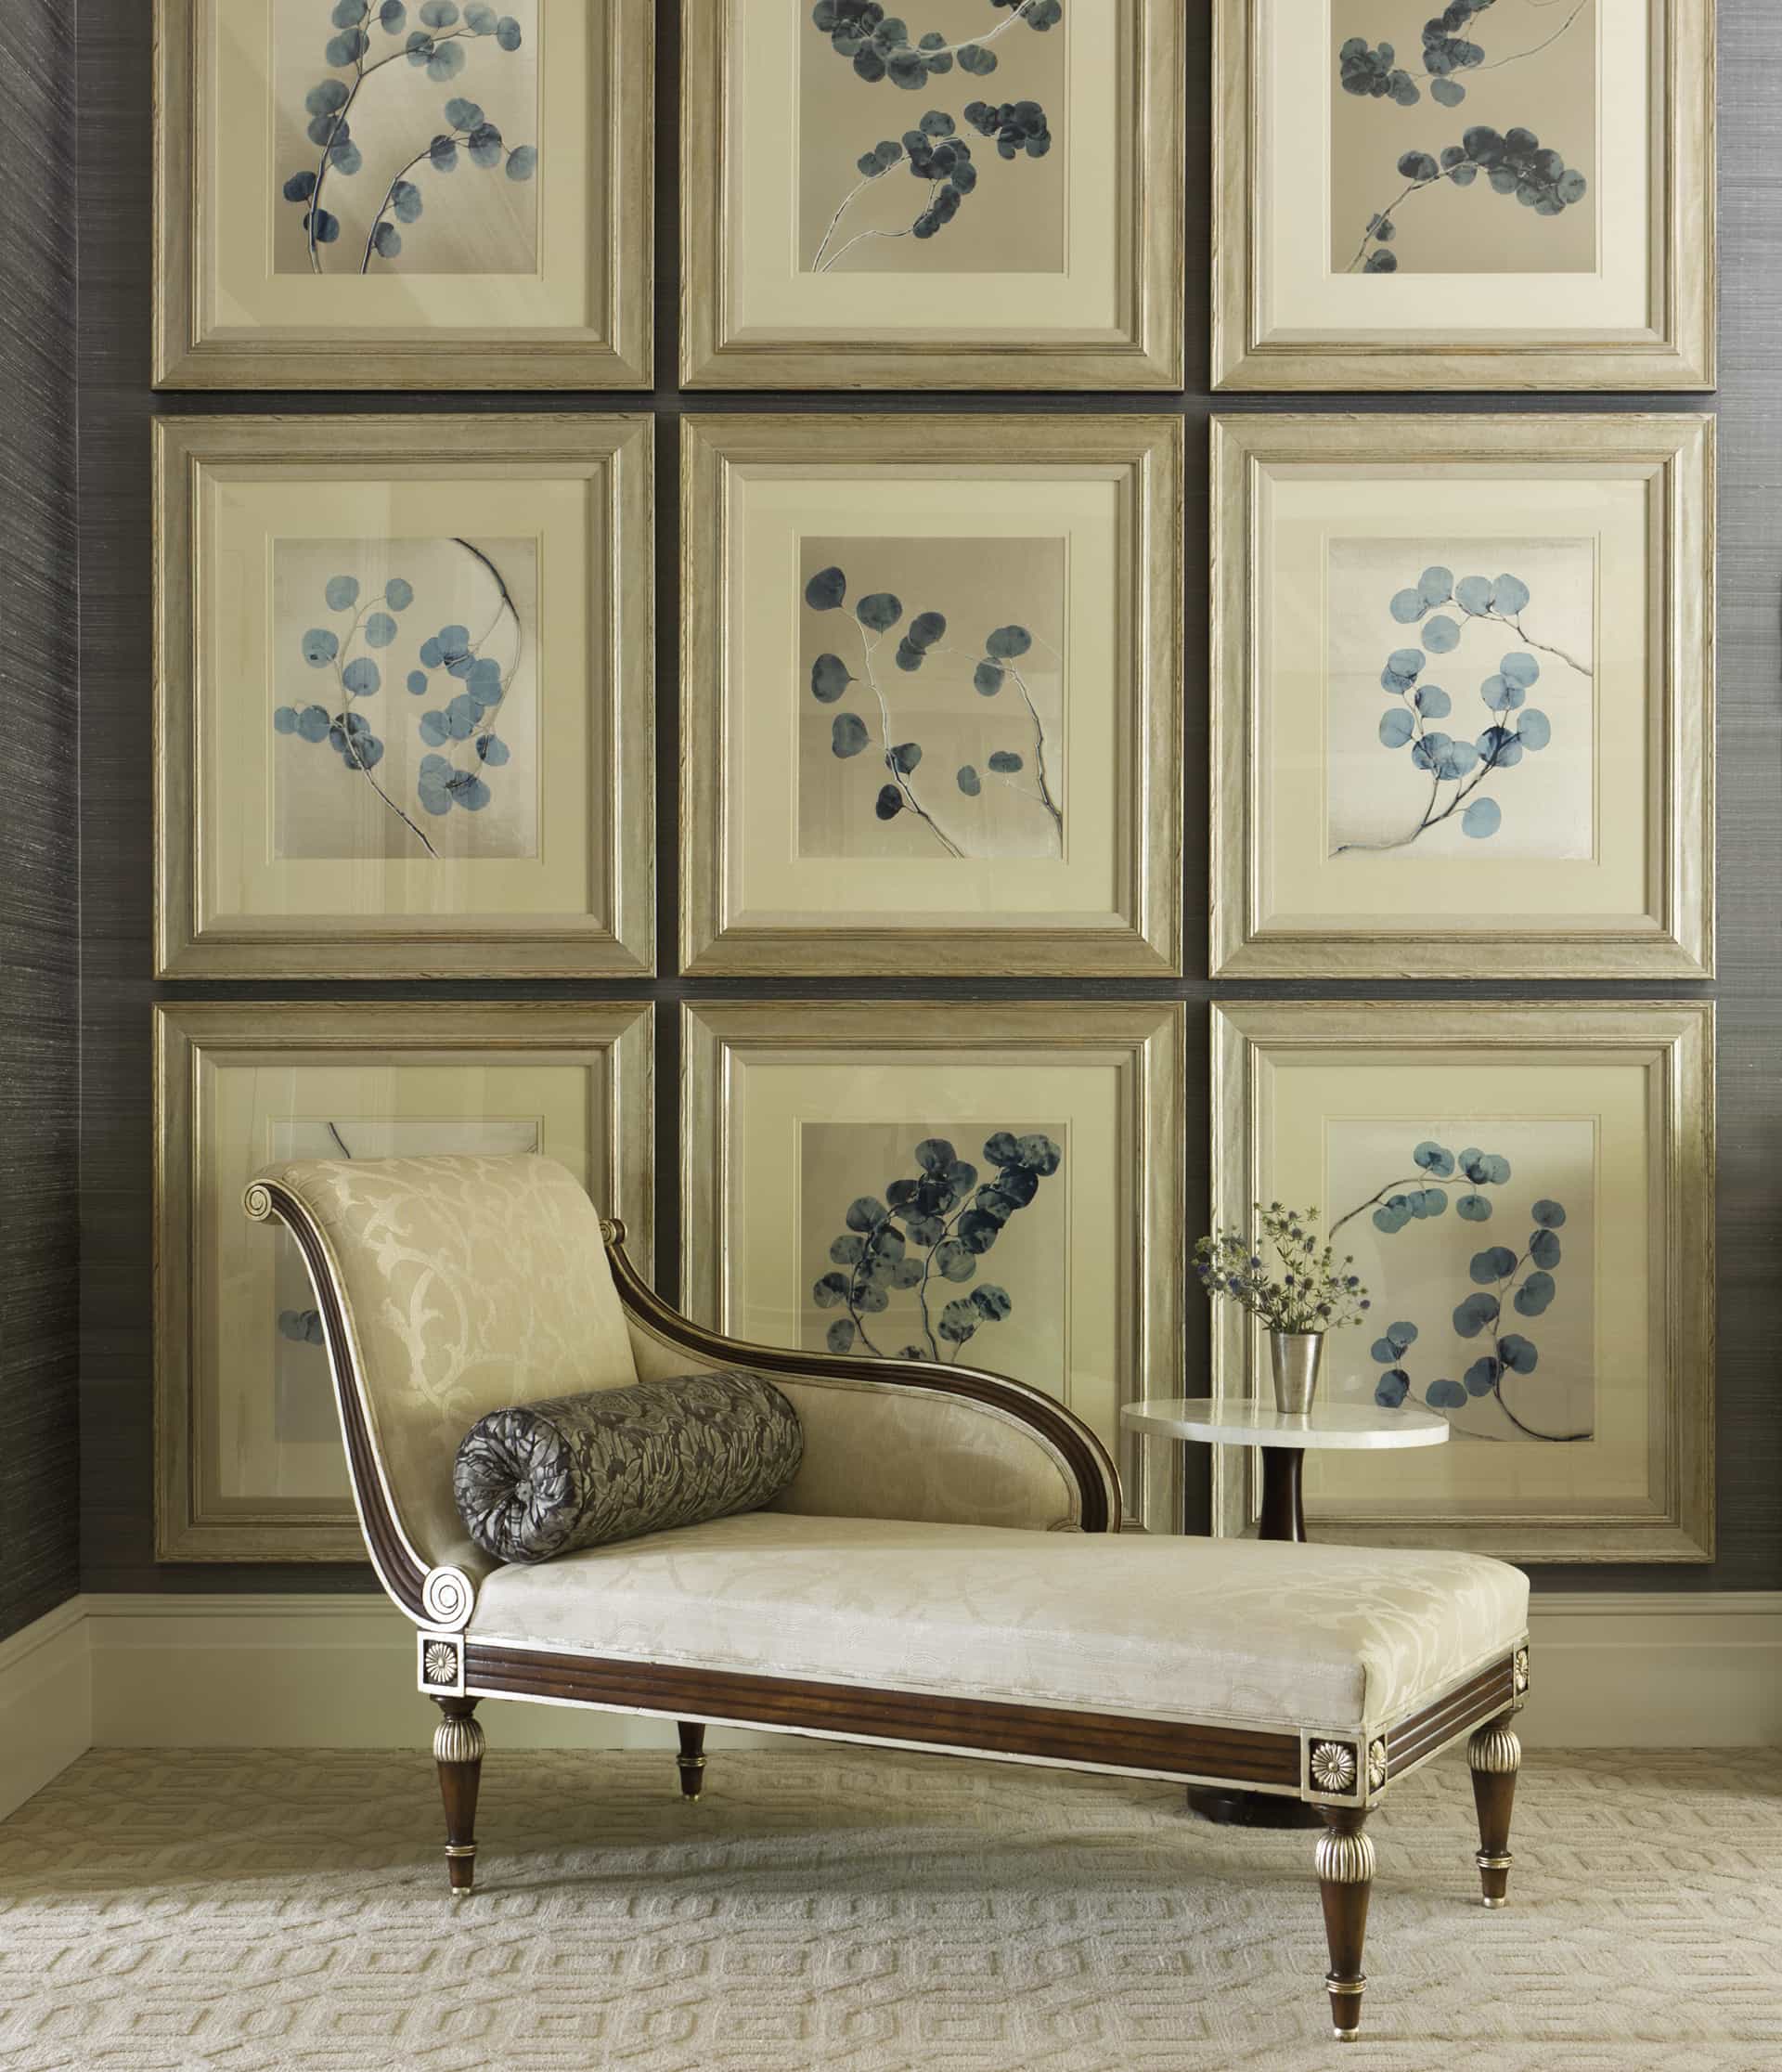 Grid of botanical paintings on the wall behind a chaise